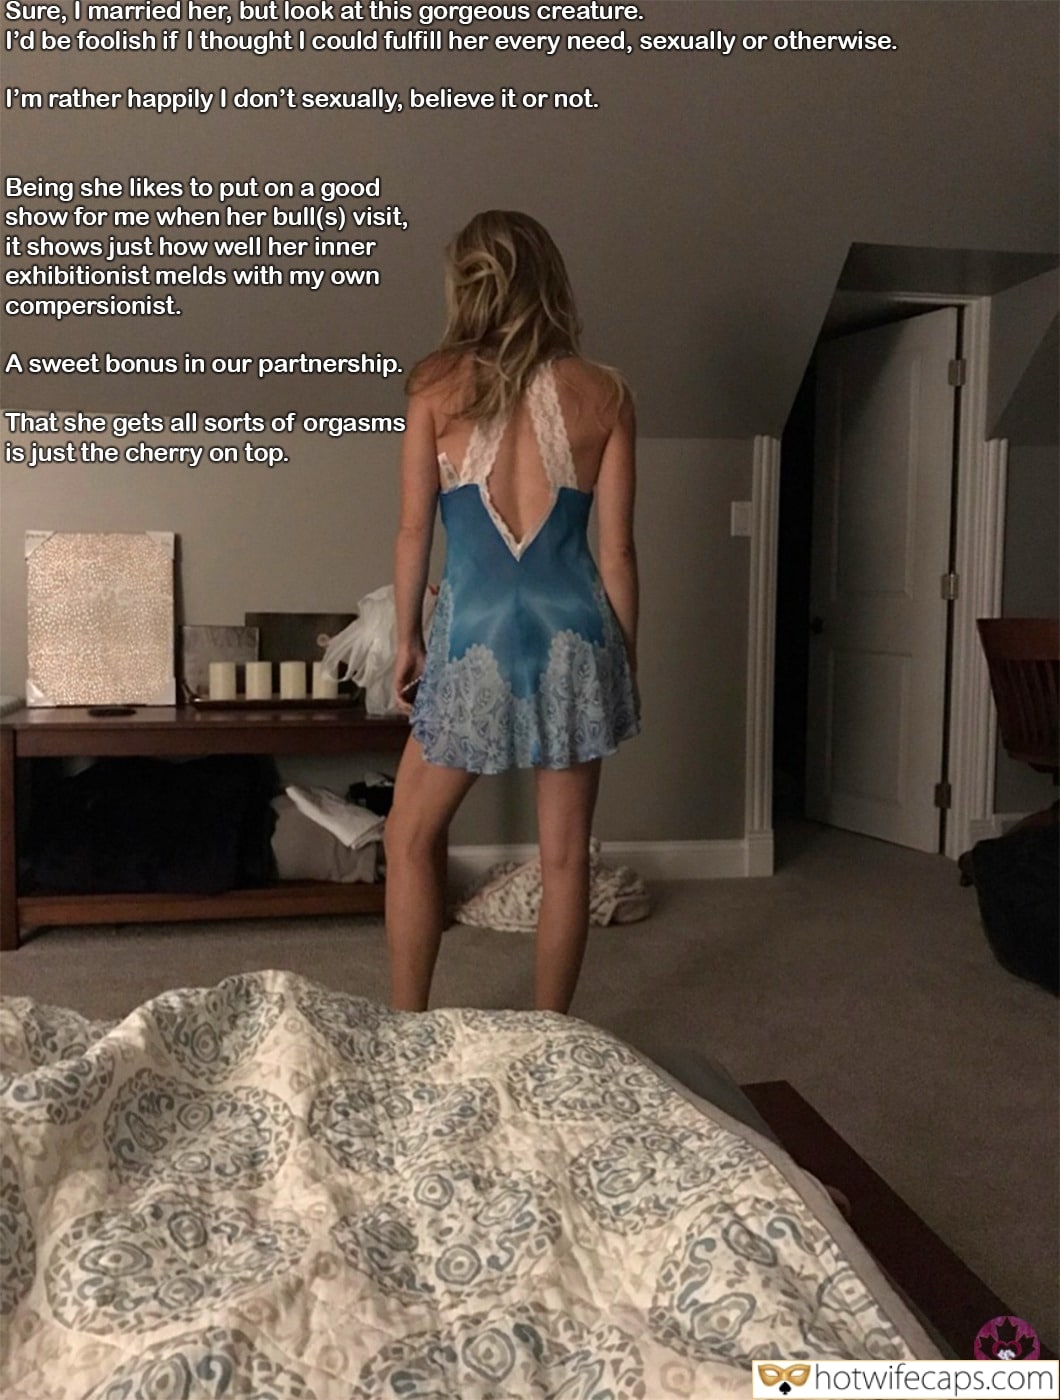 Bull, Bully, Cheating, Cuckold Stories, Sexy Memes Hotwife Caption №565134 home dress for meeting guests pic